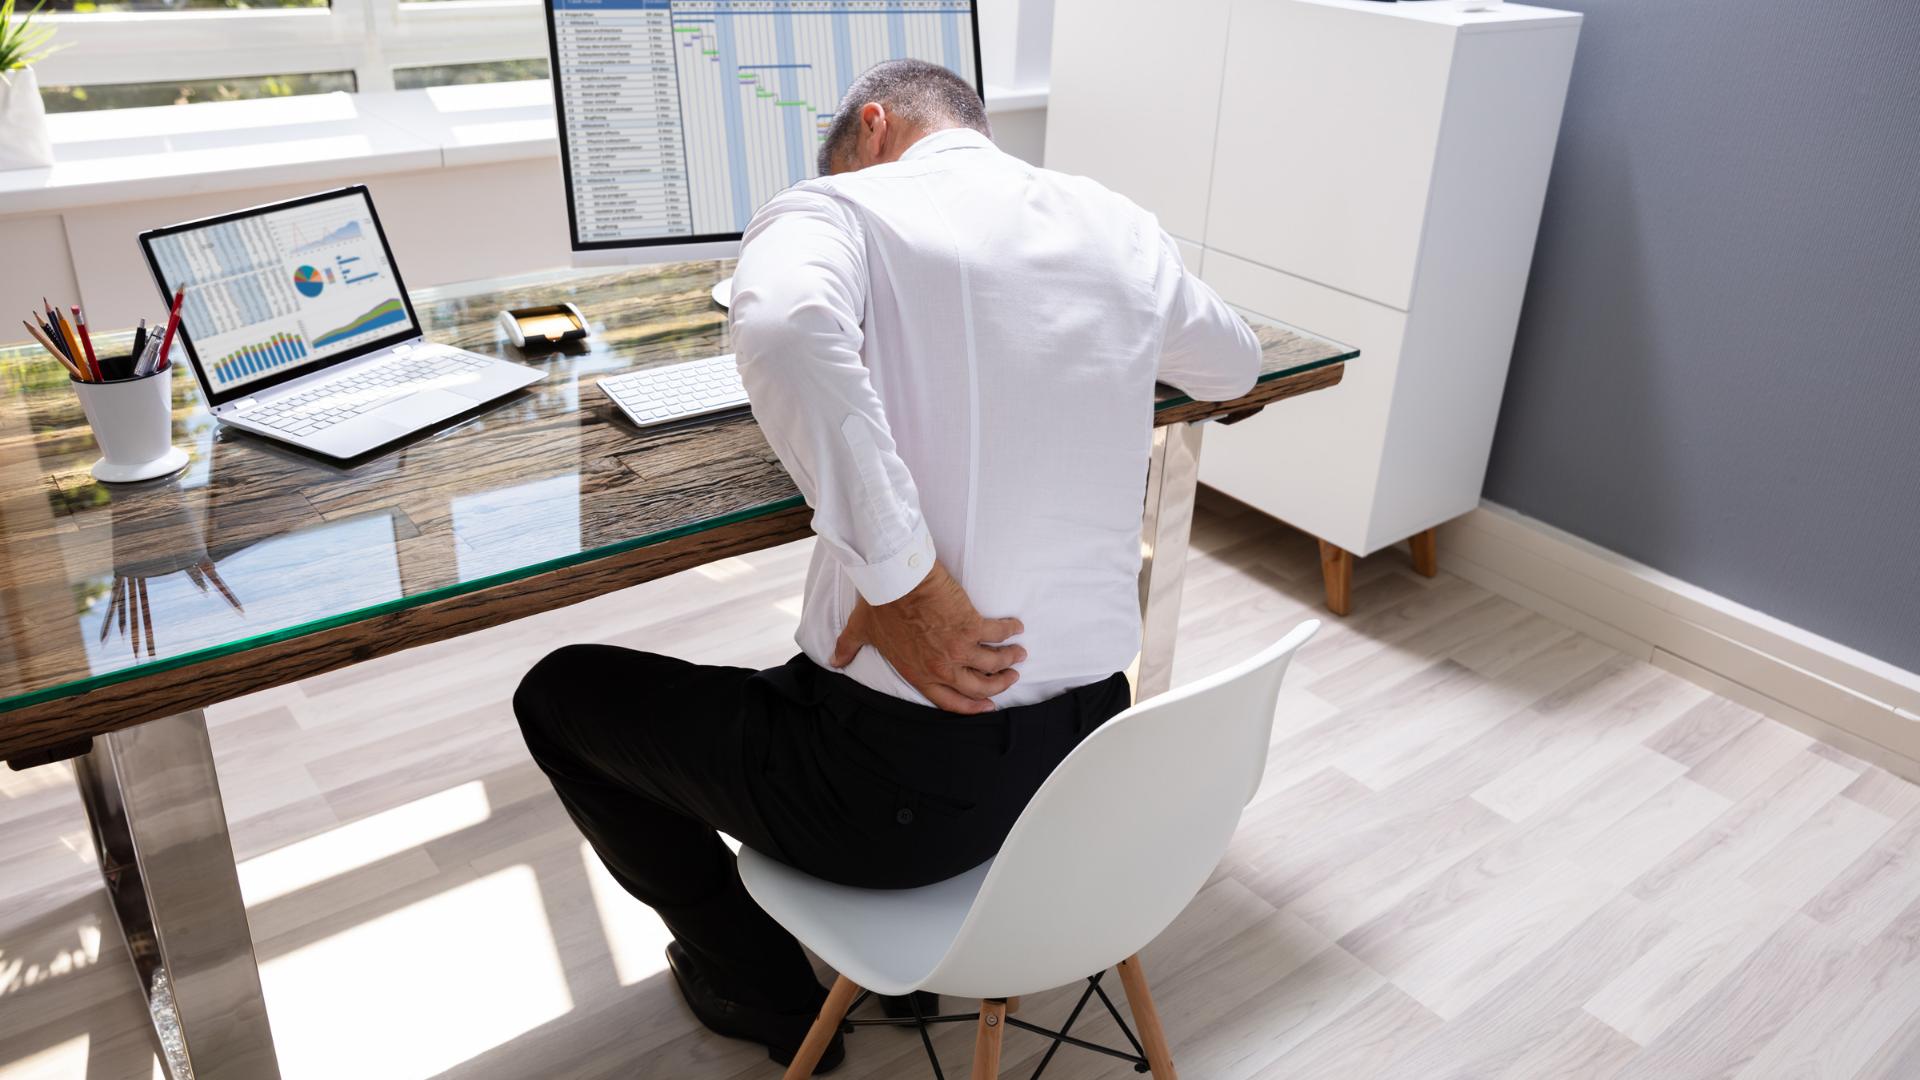 5 ways to prevent back pain if you spend long hours sitting at your desk